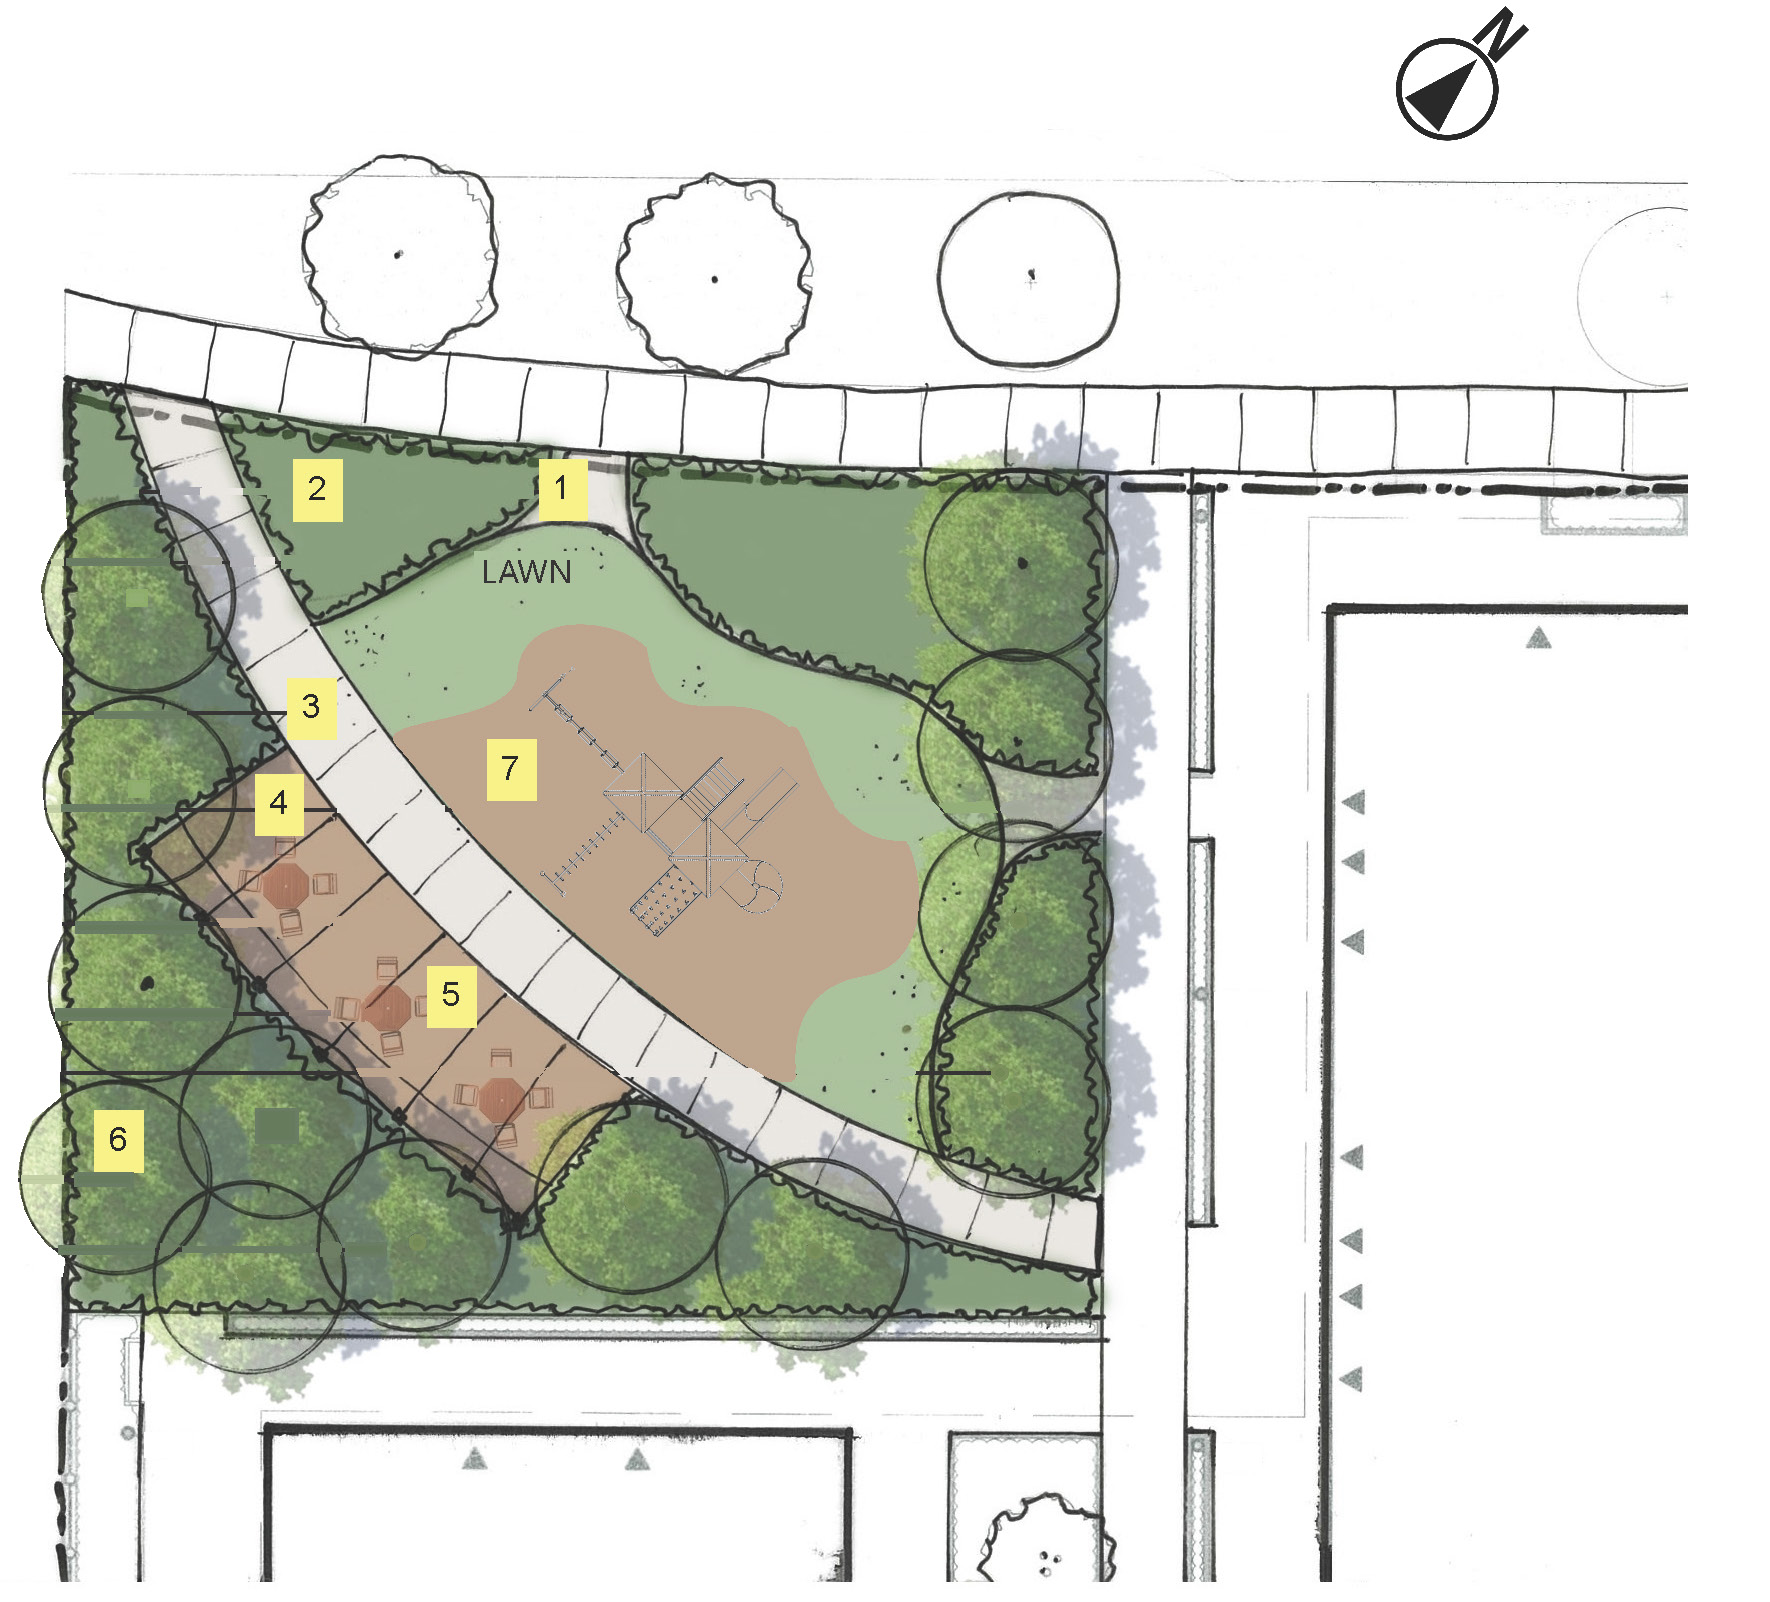 An aerial plan showing the proposed design for the new park at 71 Curlew Drive, with numbered labels showing the location of each proposed feature in yellow. 